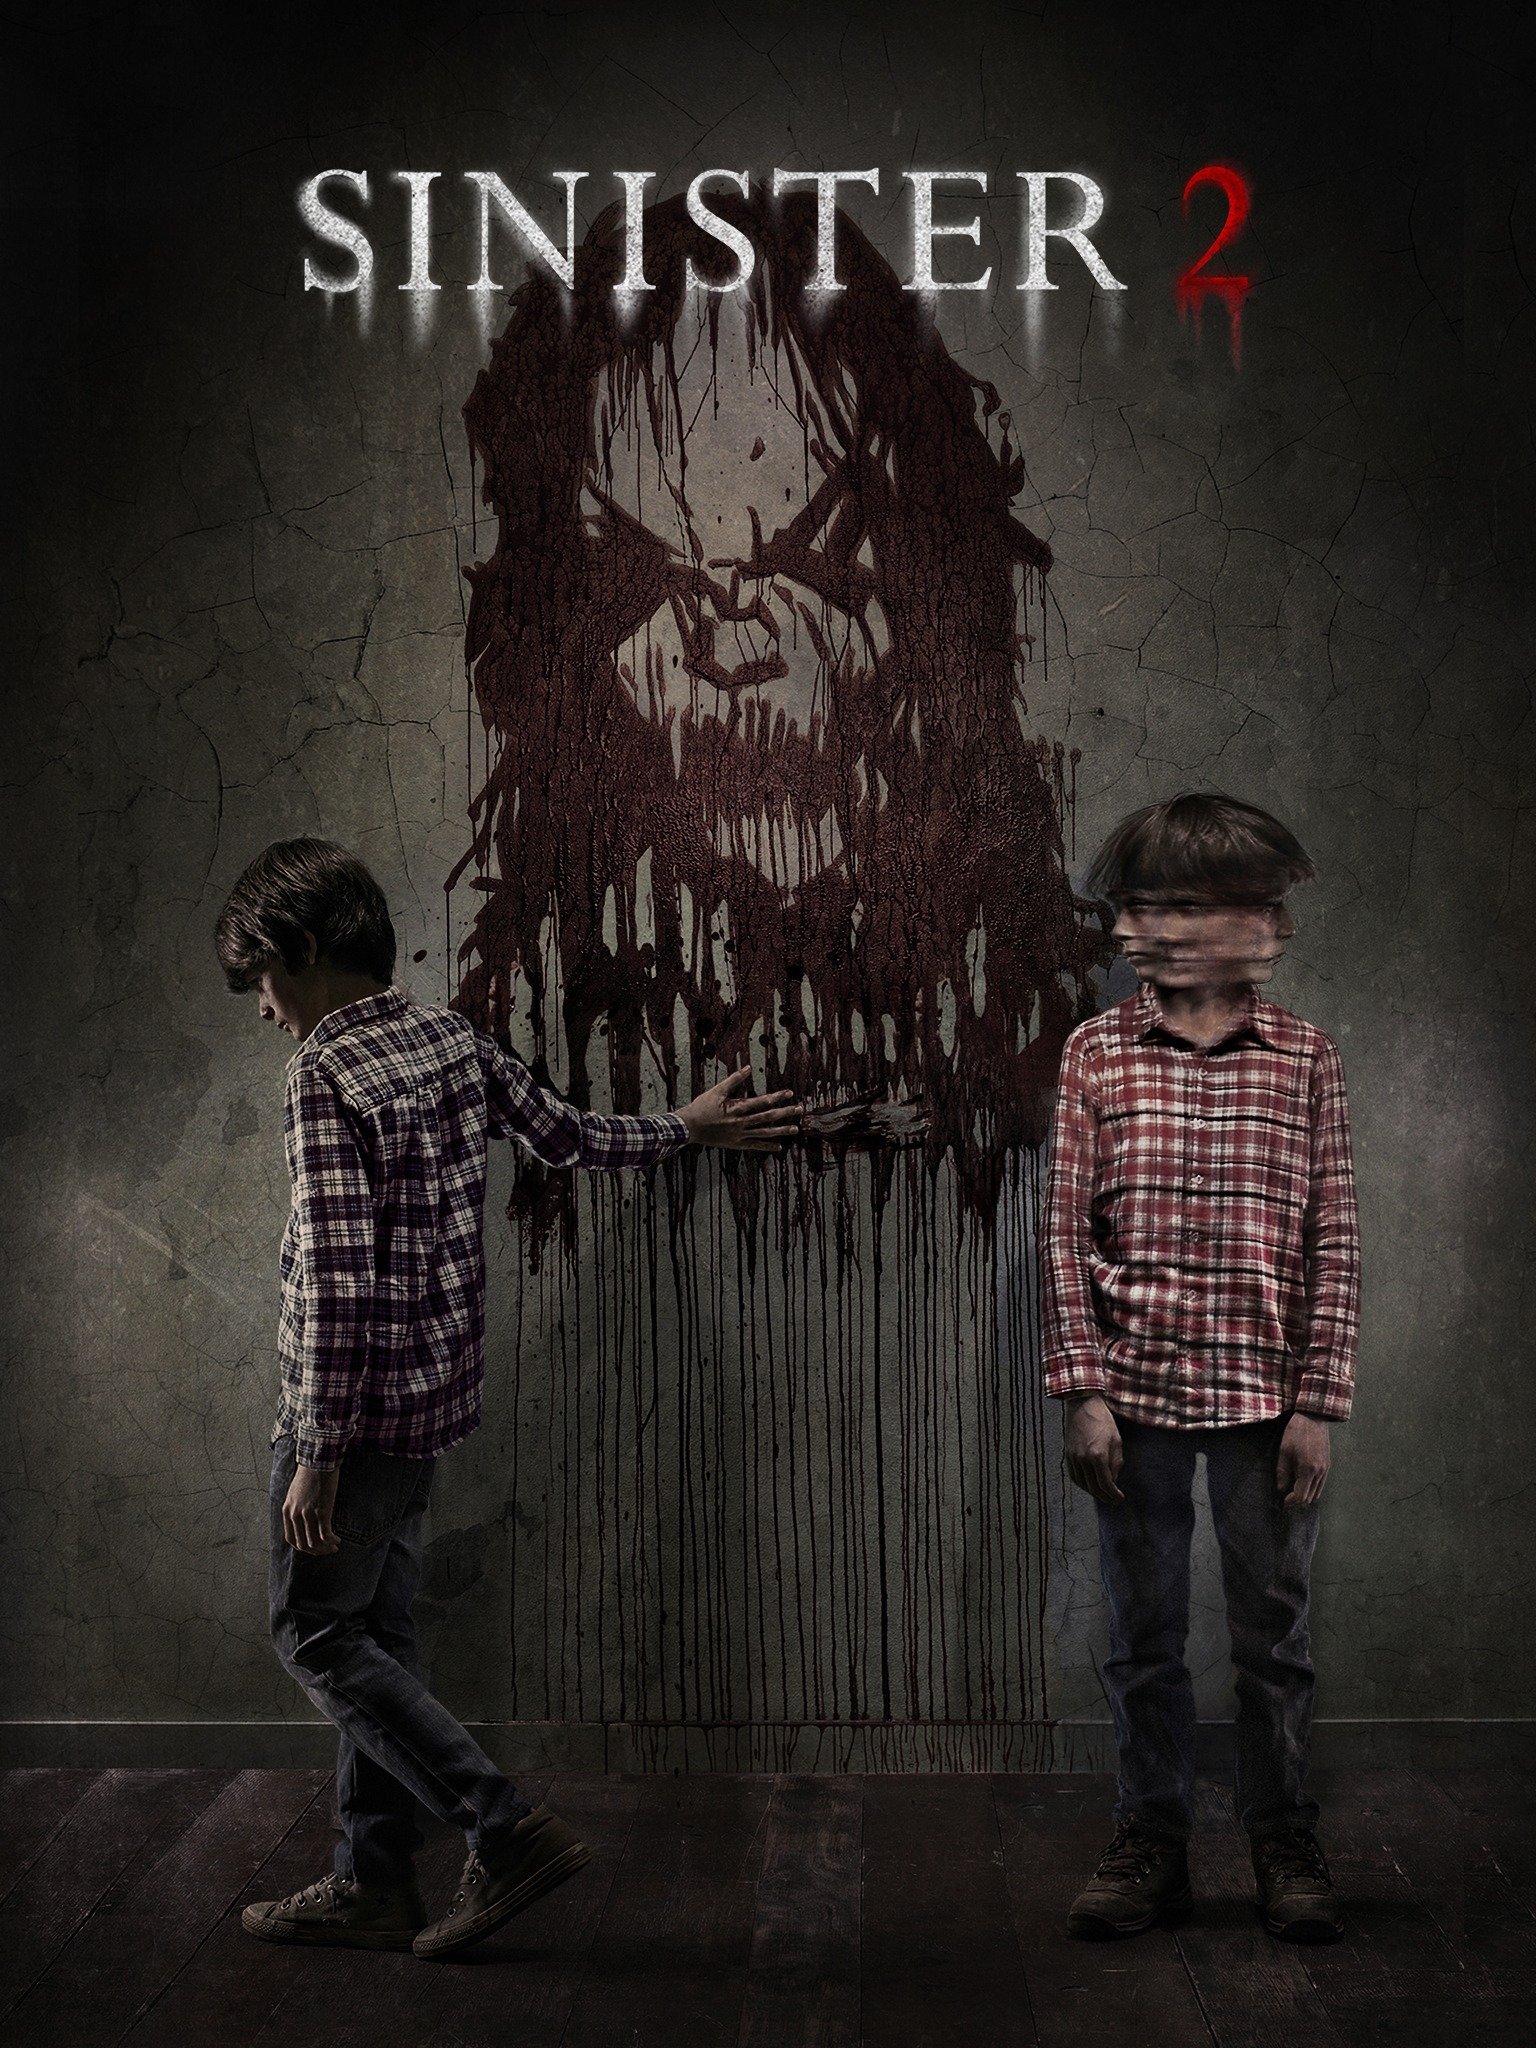 Sinister 2 2015 Rotten Tomatoes.